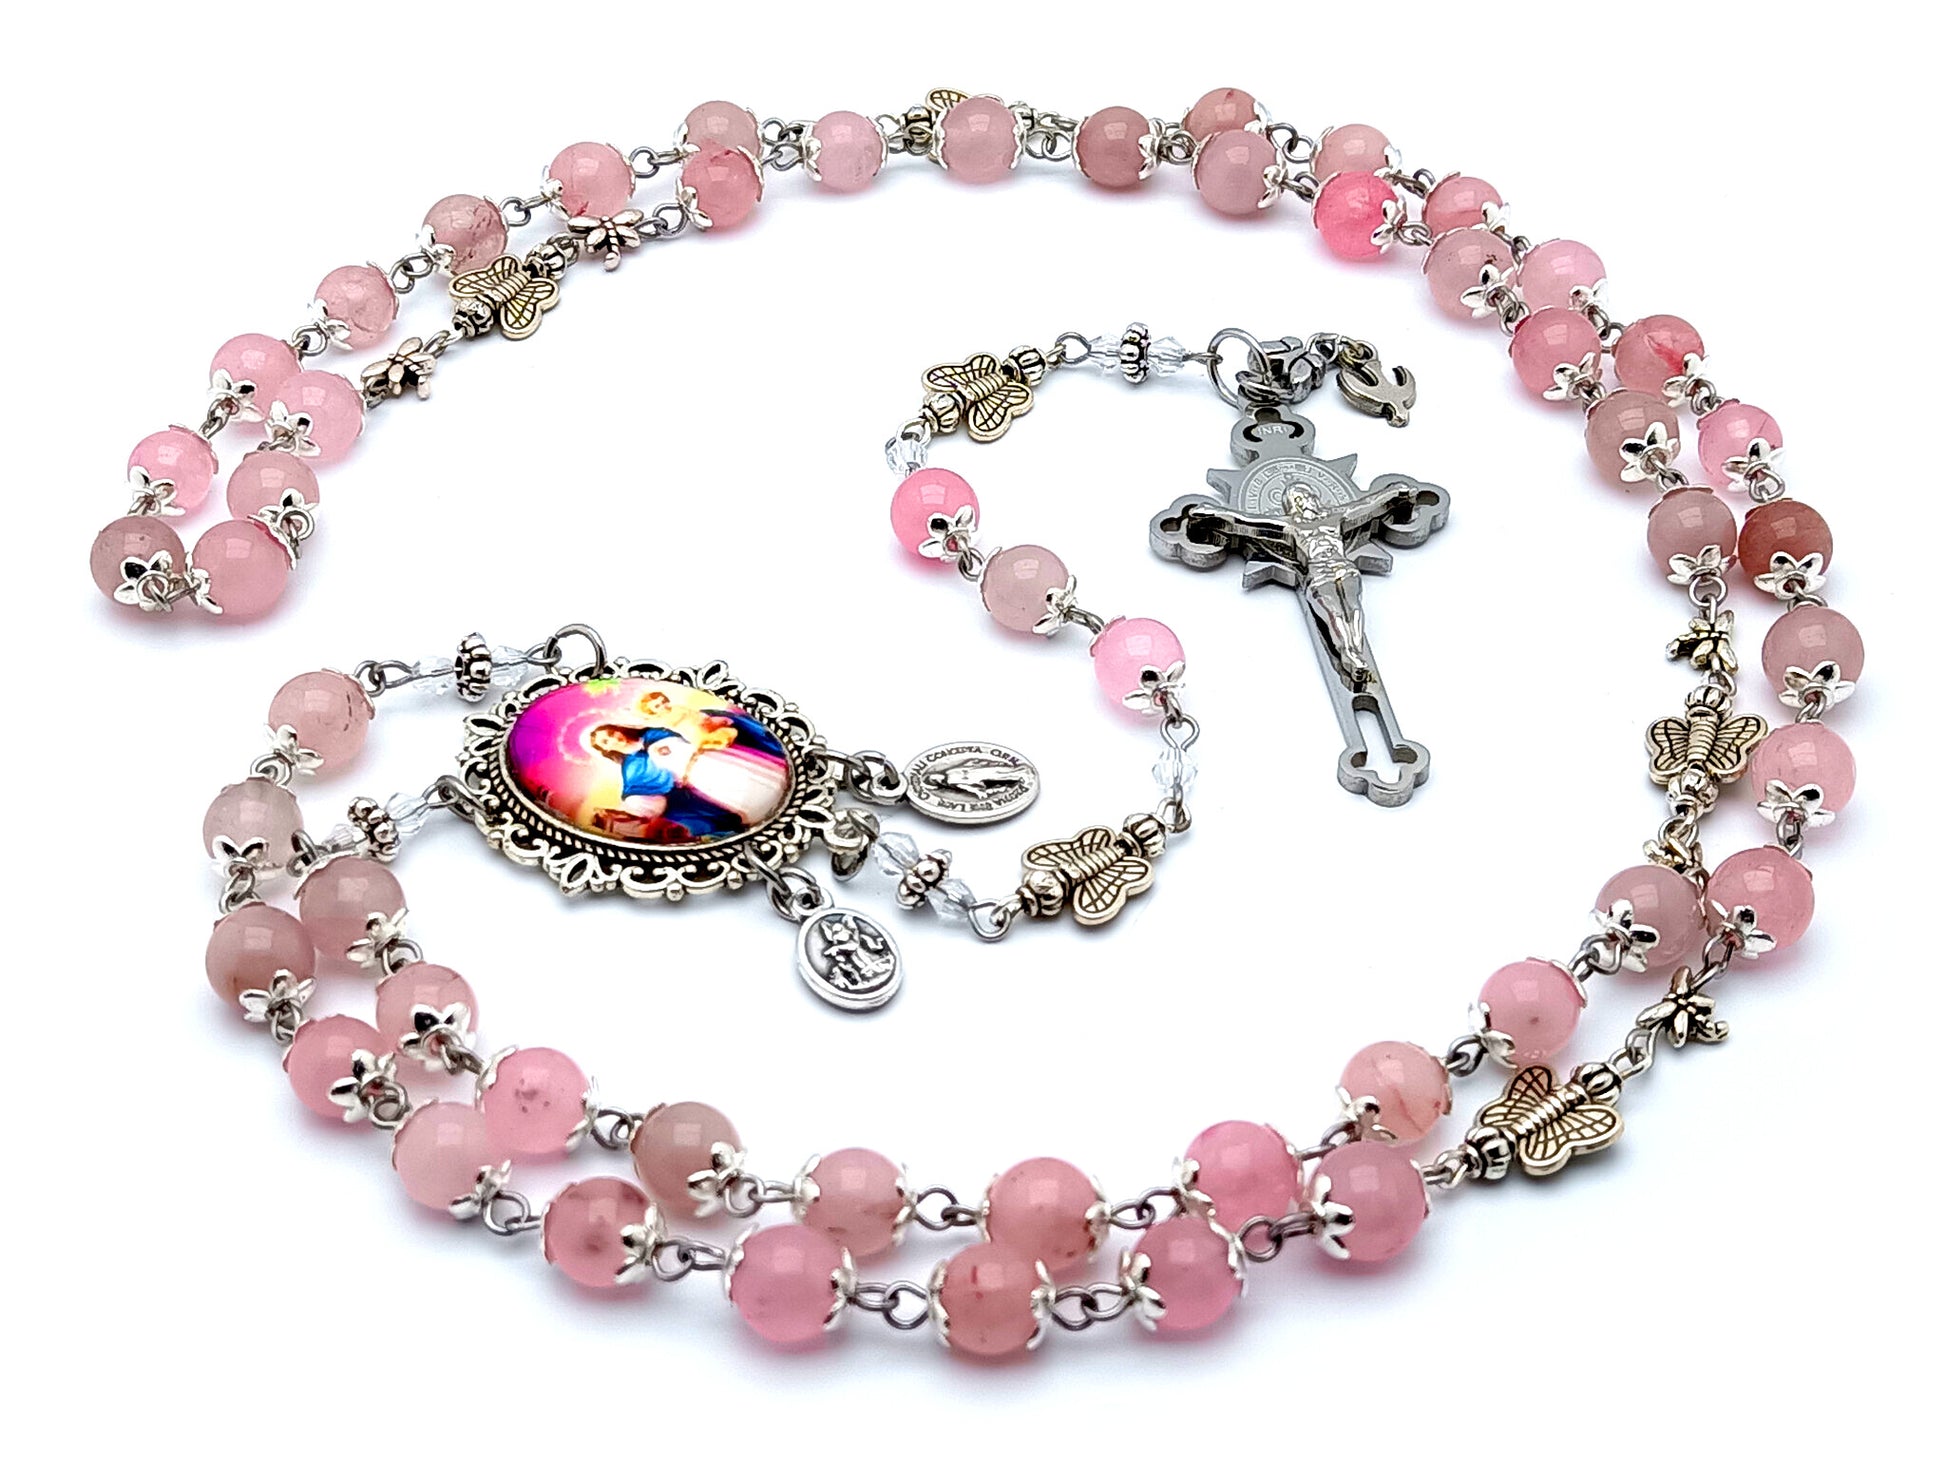 Our Lady of the Rosary unique rosary beads first Holy Communion rosary with rose quartz gemstone and butterfly Tibetan silver beads and Saint Benedict crucifix.